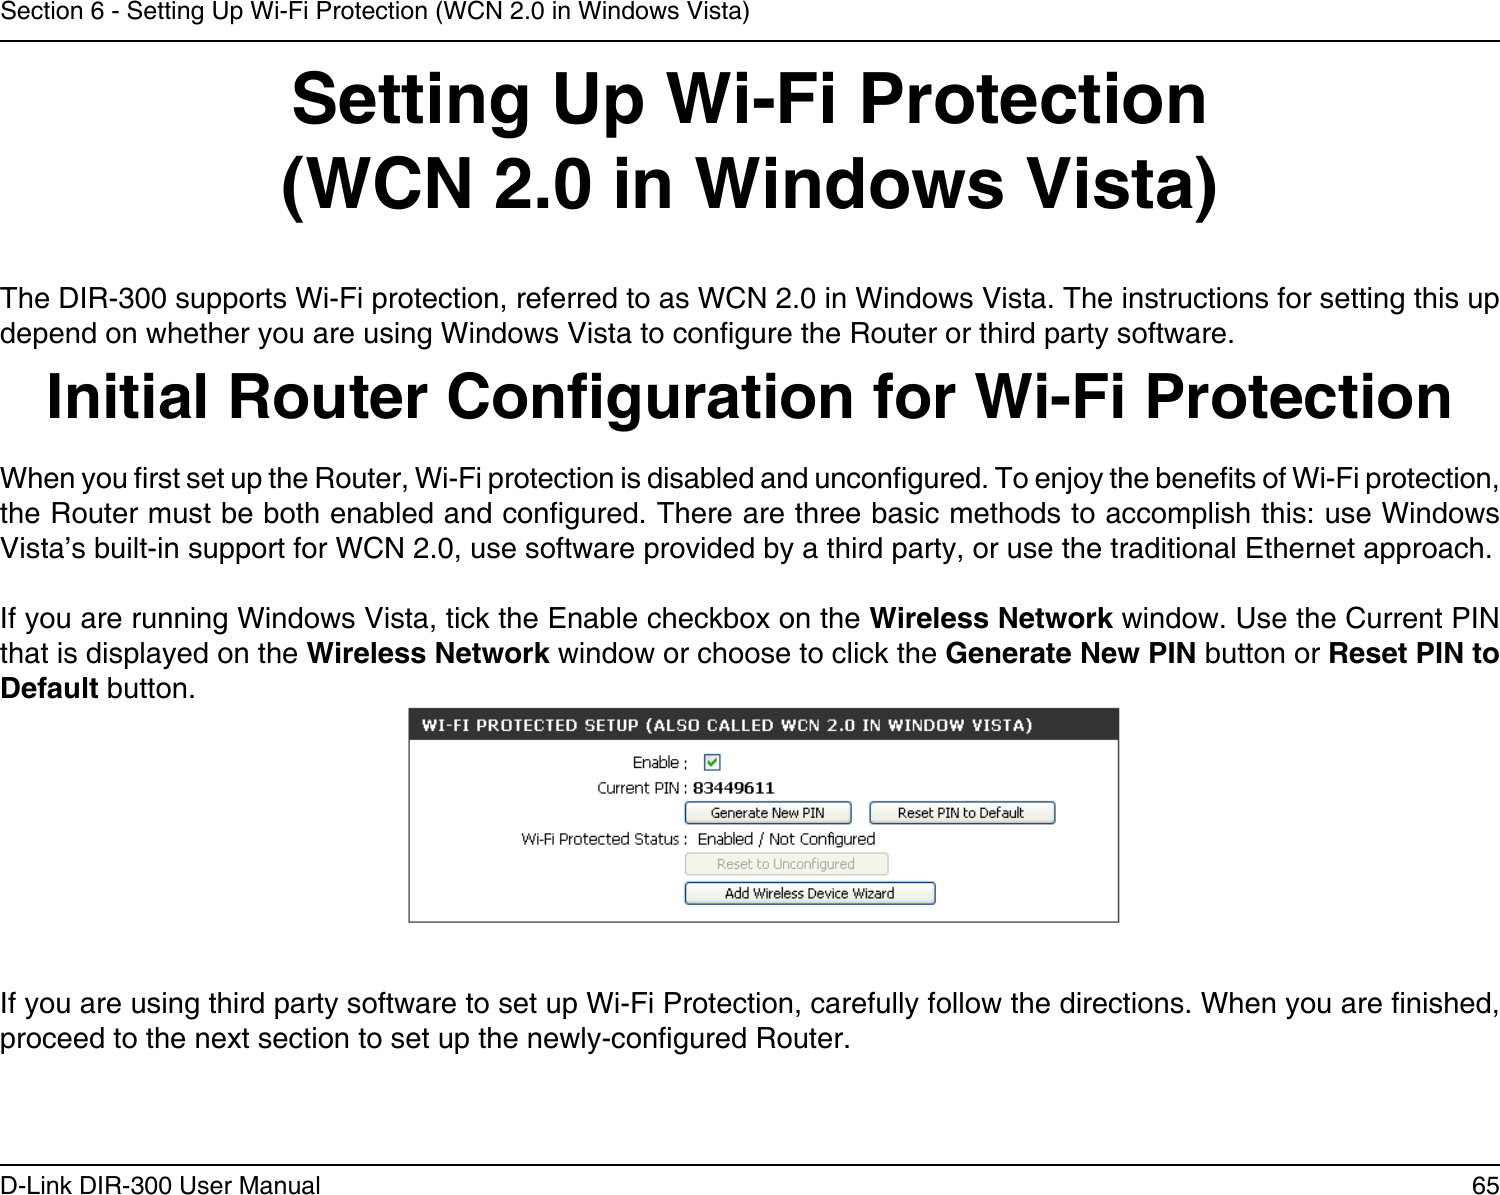 65D-Link DIR-300 User ManualSection 6 - Setting Up Wi-Fi Protection (WCN 2.0 in Windows Vista)Setting Up Wi-Fi Protection(WCN 2.0 in Windows Vista)The DIR-300 supports Wi-Fi protection, referred to as WCN 2.0 in Windows Vista. The instructions for setting this up depend on whether you are using Windows Vista to congure the Router or third party software.        Initial Router Conguration for Wi-Fi ProtectionWhen you rst set up the Router, Wi-Fi protection is disabled and uncongured. To enjoy the benets of Wi-Fi protection, the Router must be both enabled and congured. There are three basic methods to accomplish this: use Windows Vista’s built-in support for WCN 2.0, use software provided by a third party, or use the traditional Ethernet approach. If you are running Windows Vista, tick the Enable checkbox on the Wireless Network window. Use the Current PIN that is displayed on the Wireless Network window or choose to click the Generate New PIN button or Reset PIN to Default button. If you are using third party software to set up Wi-Fi Protection, carefully follow the directions. When you are nished, proceed to the next section to set up the newly-congured Router. 